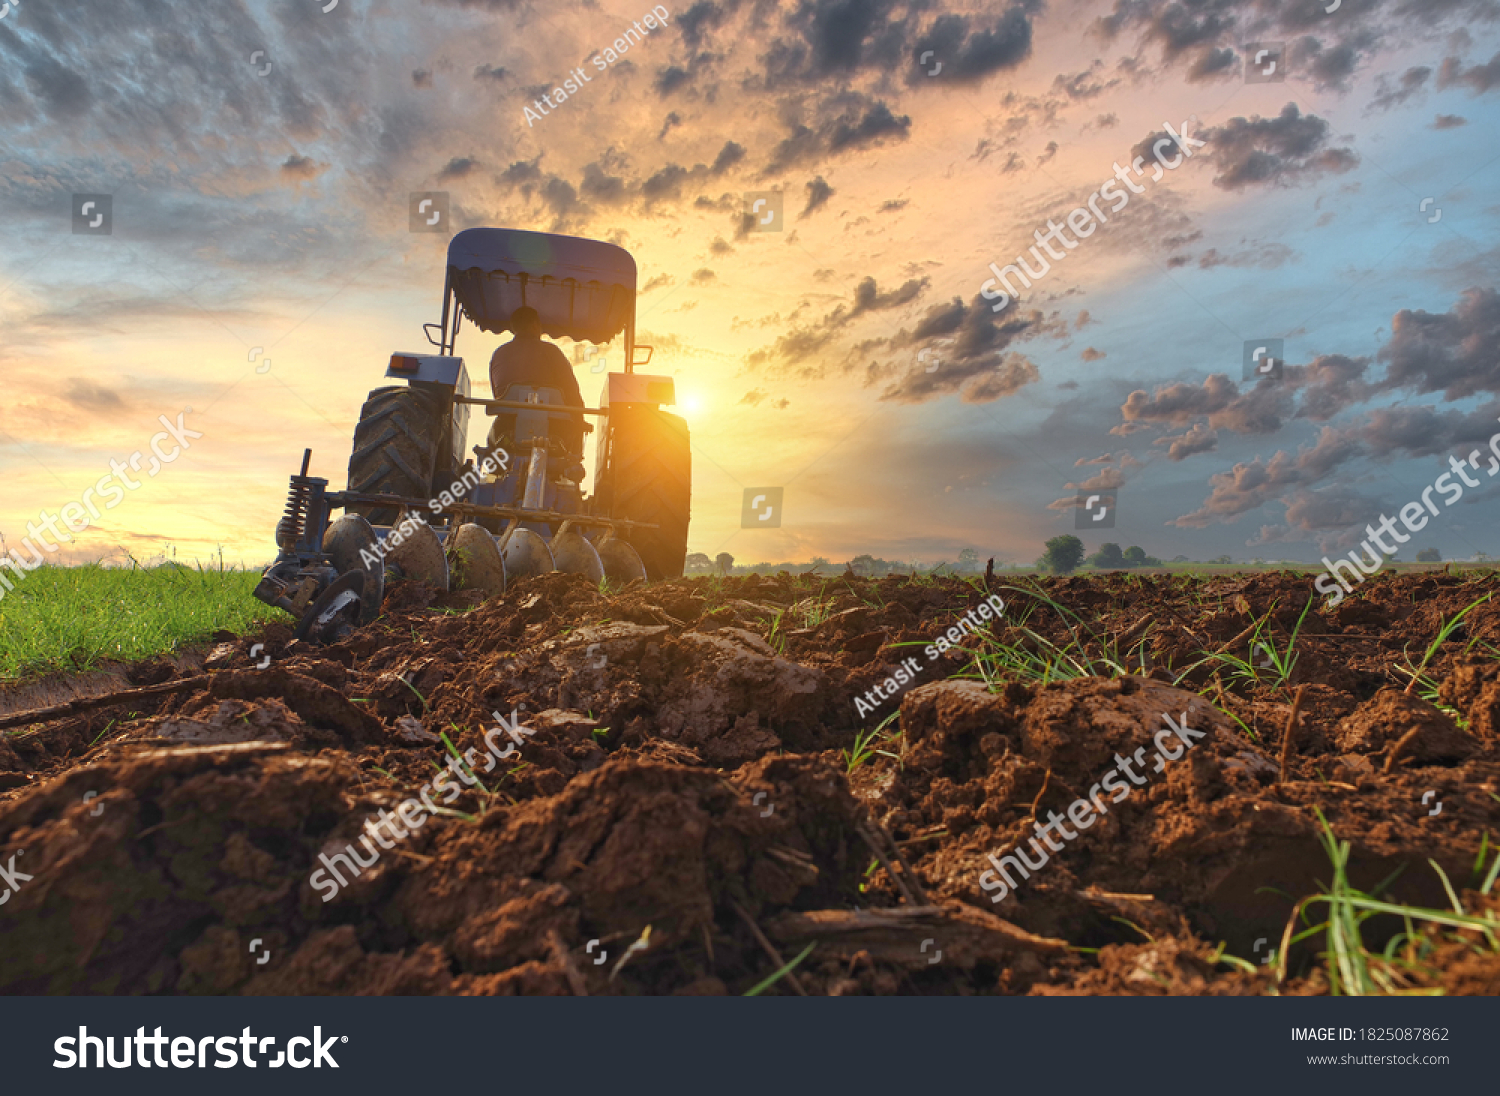 Farmer in tractor preparing land with seedbed cultivator as part of pre seeding activities in early spring season of agricultural works at farmlands Cultivated field Agronomy farming husbandry concept #1825087862